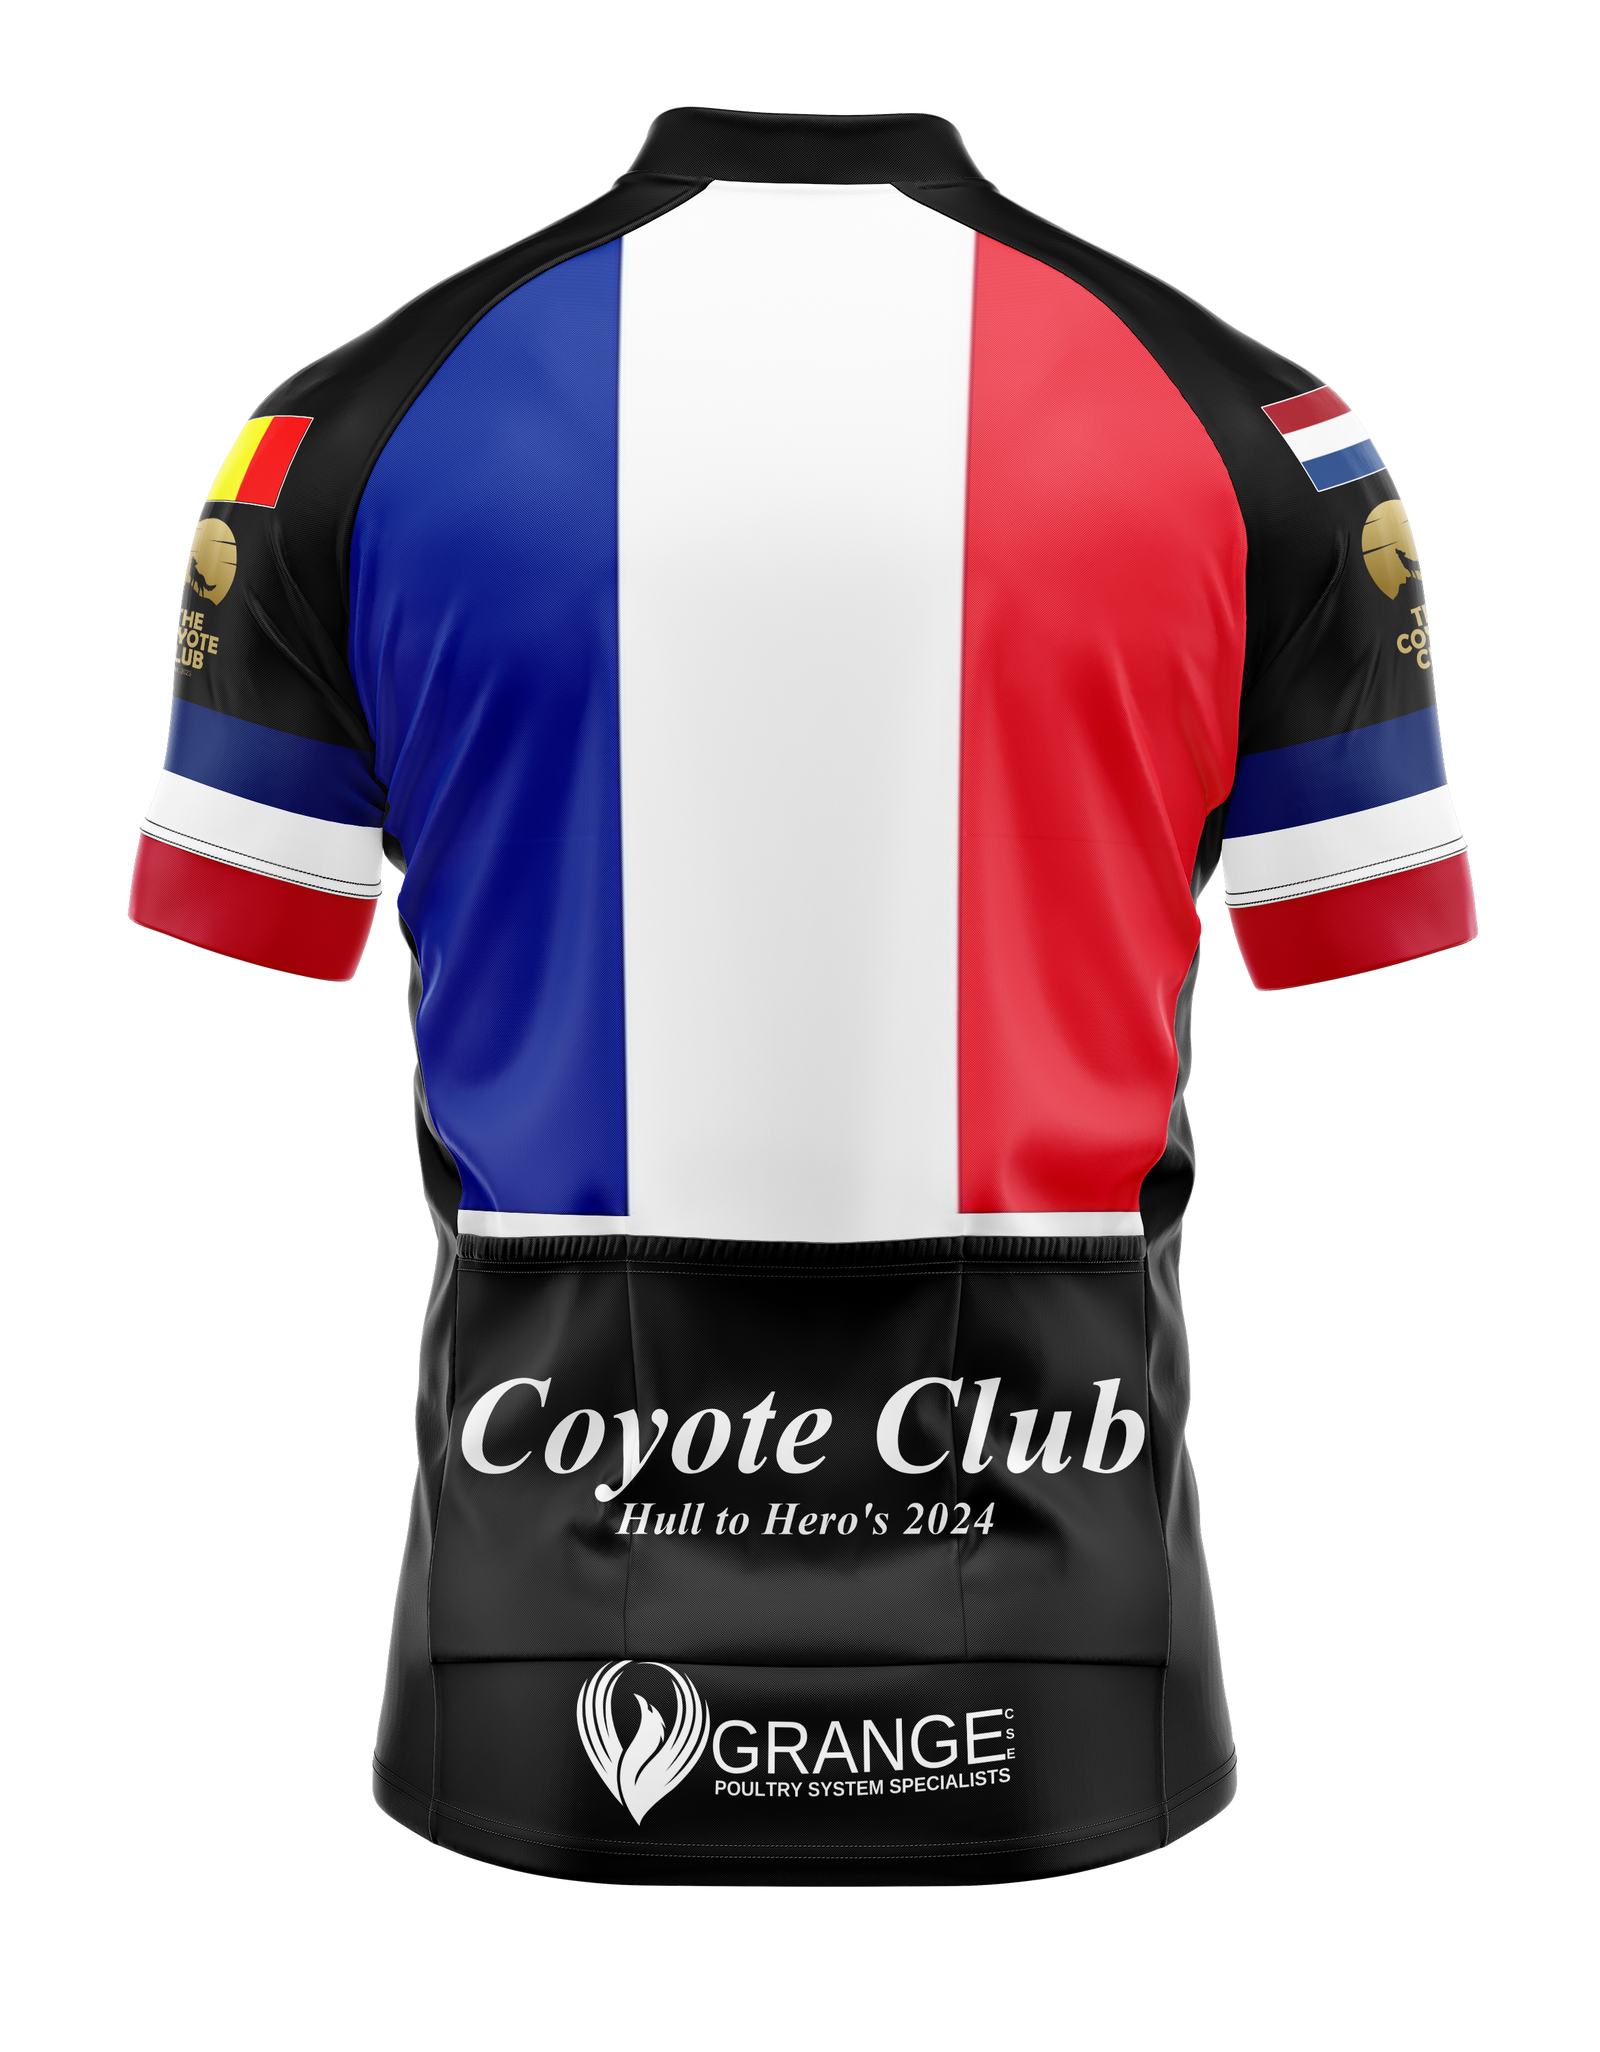 Coyote Club Cycling Top